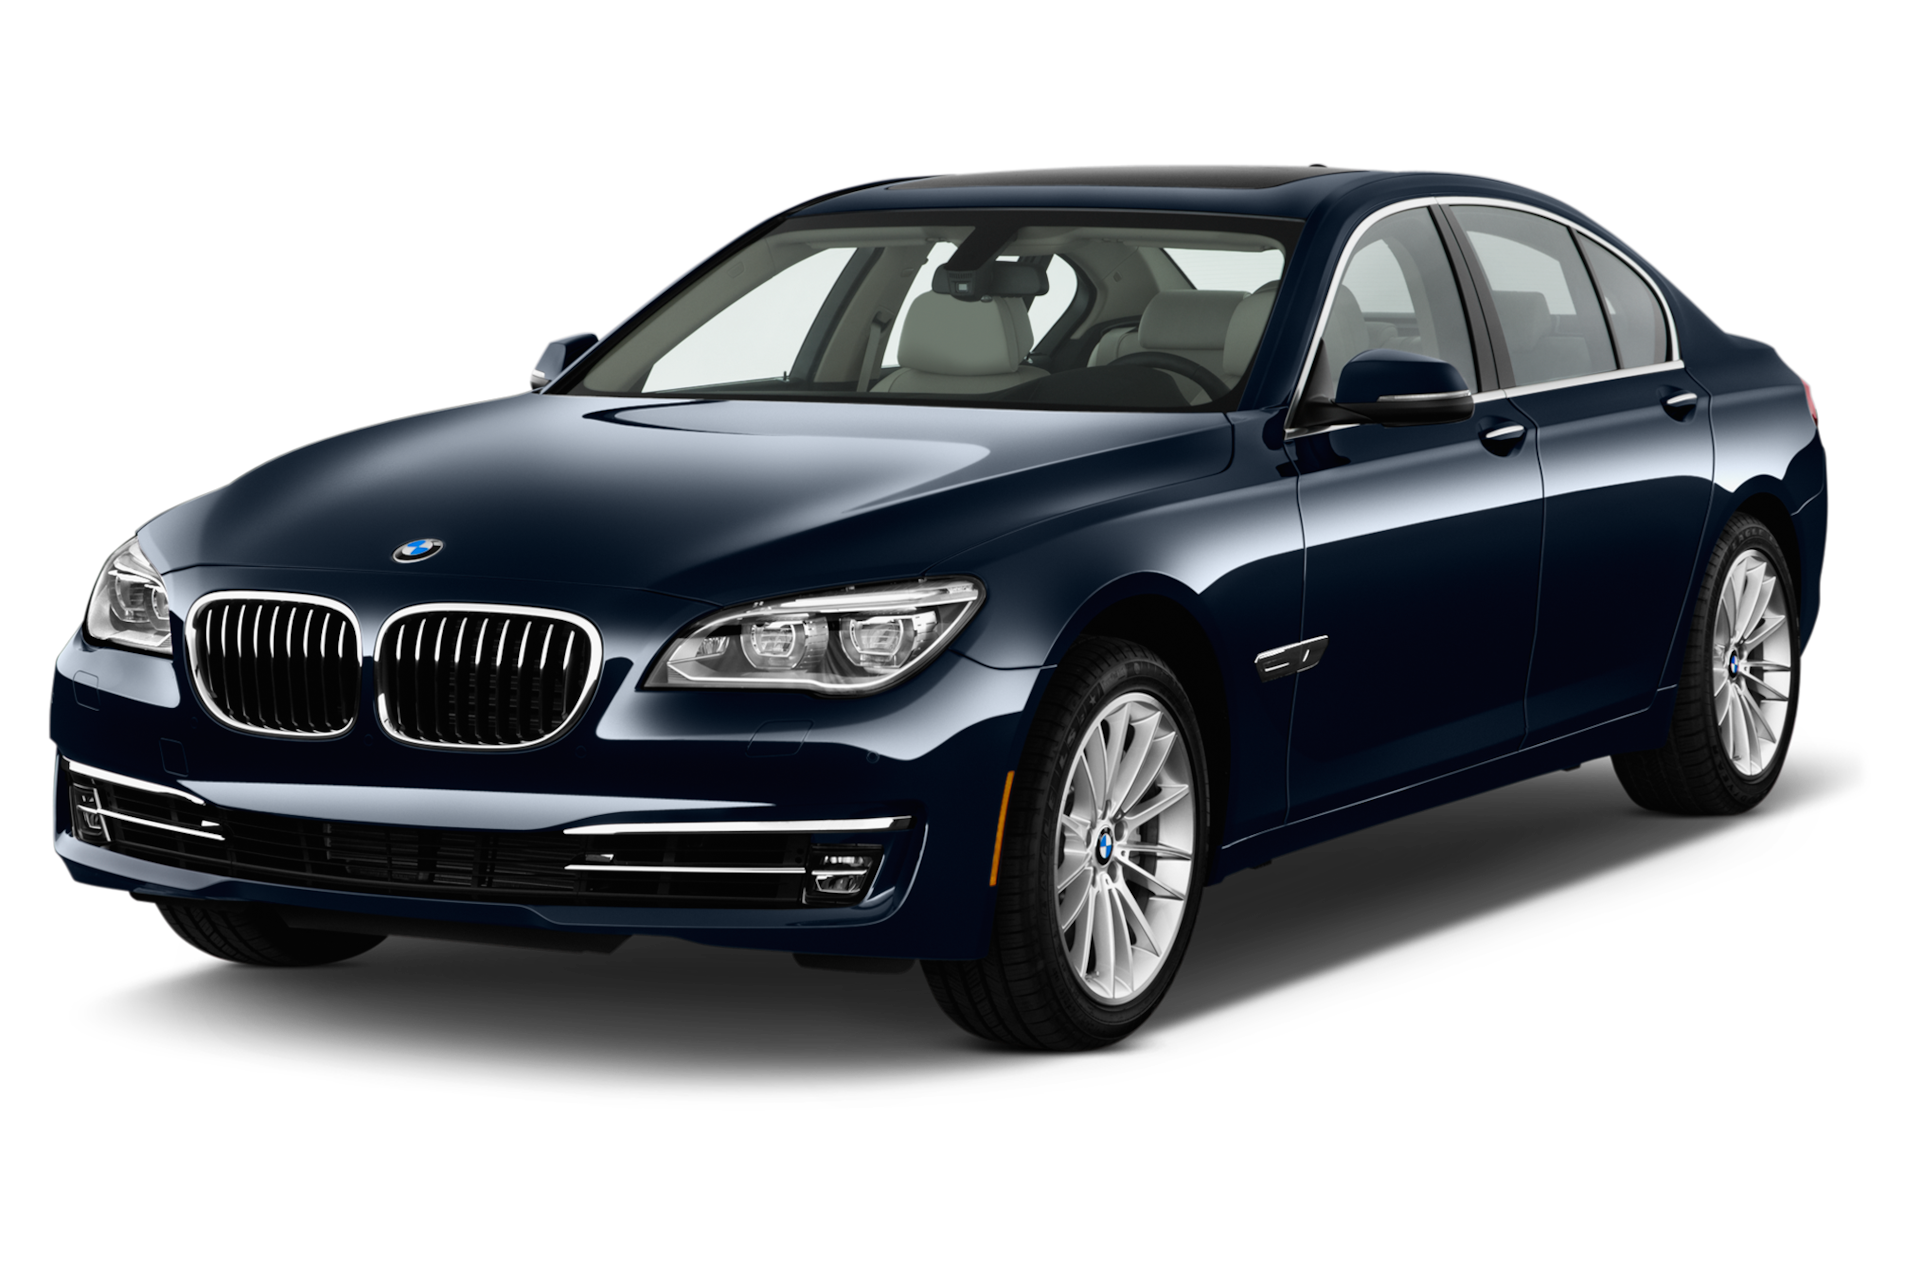 2013 BMW 7-Series Prices, Reviews, and Photos - MotorTrend